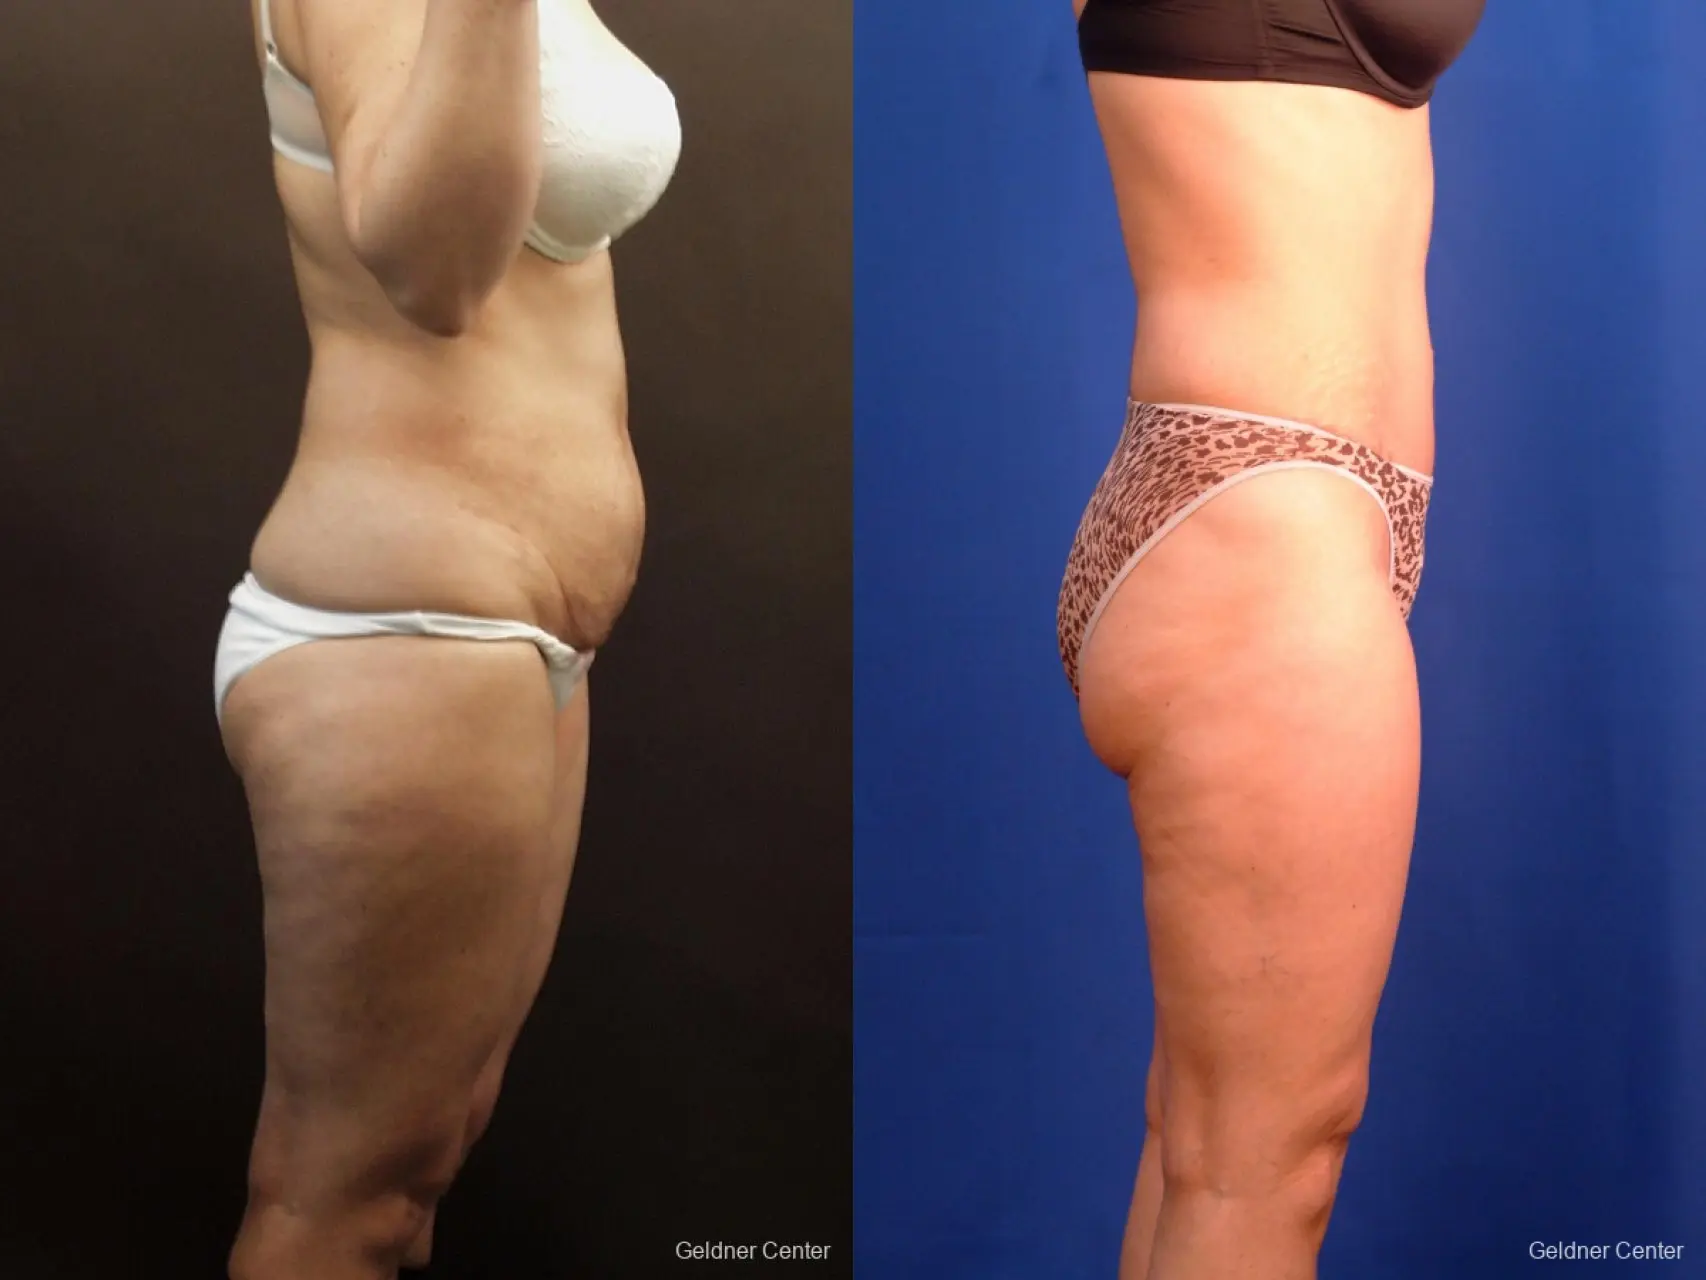 Tummy Tuck: Patient 8 - Before and After 3